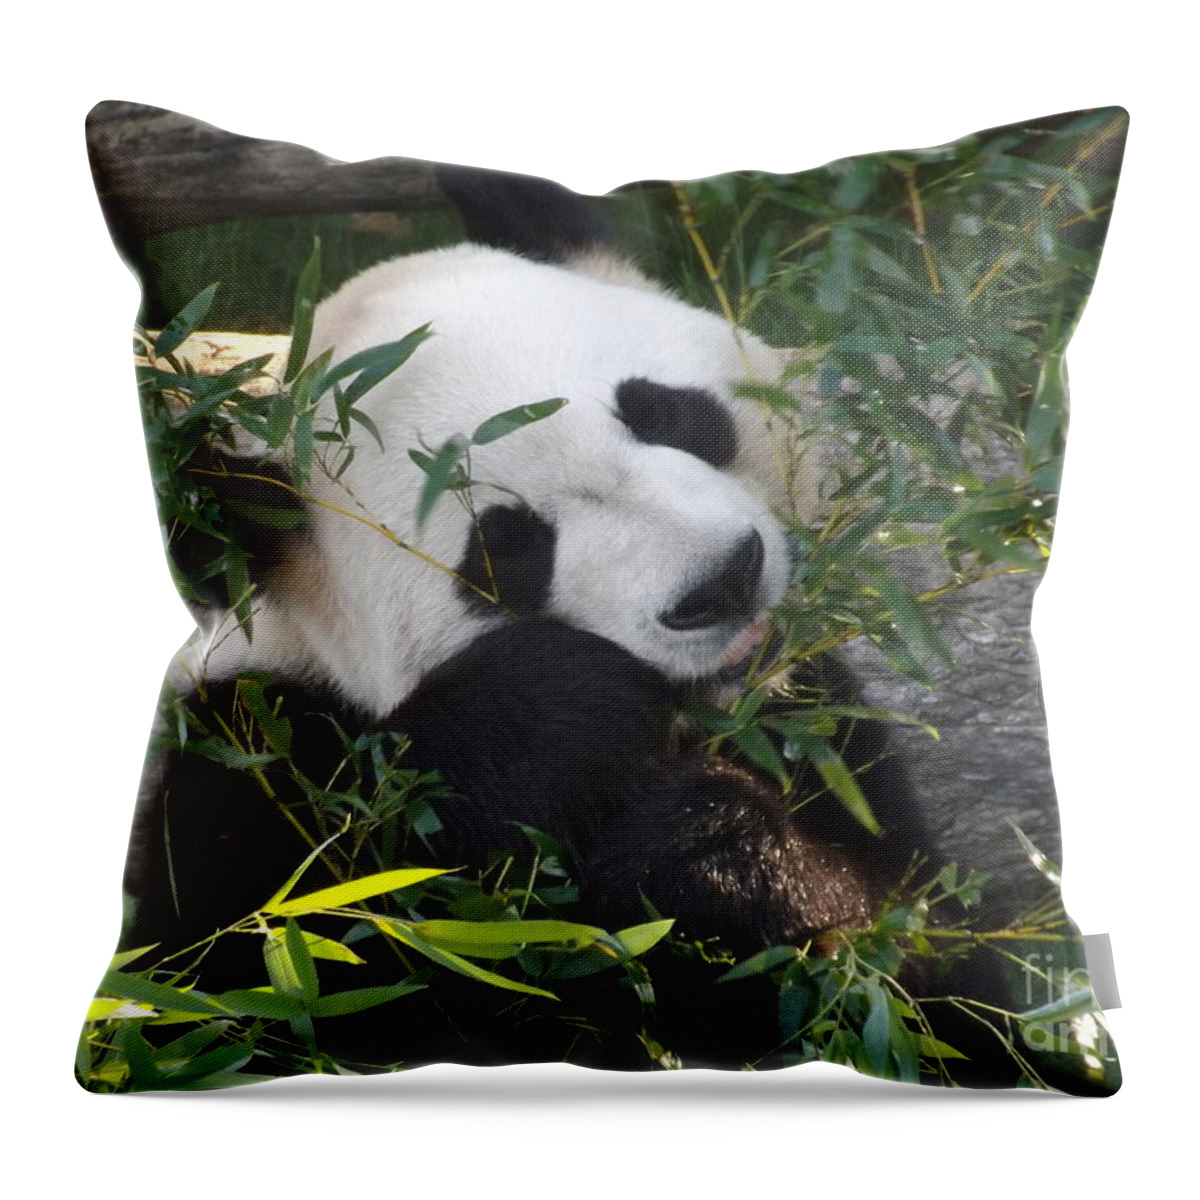 Nature Panda Wild White Fur Animal Black Bear Asia Giant Wildlife China Reserve Throw Pillow featuring the photograph The Art of Posing at Breakfast by Lingfai Leung